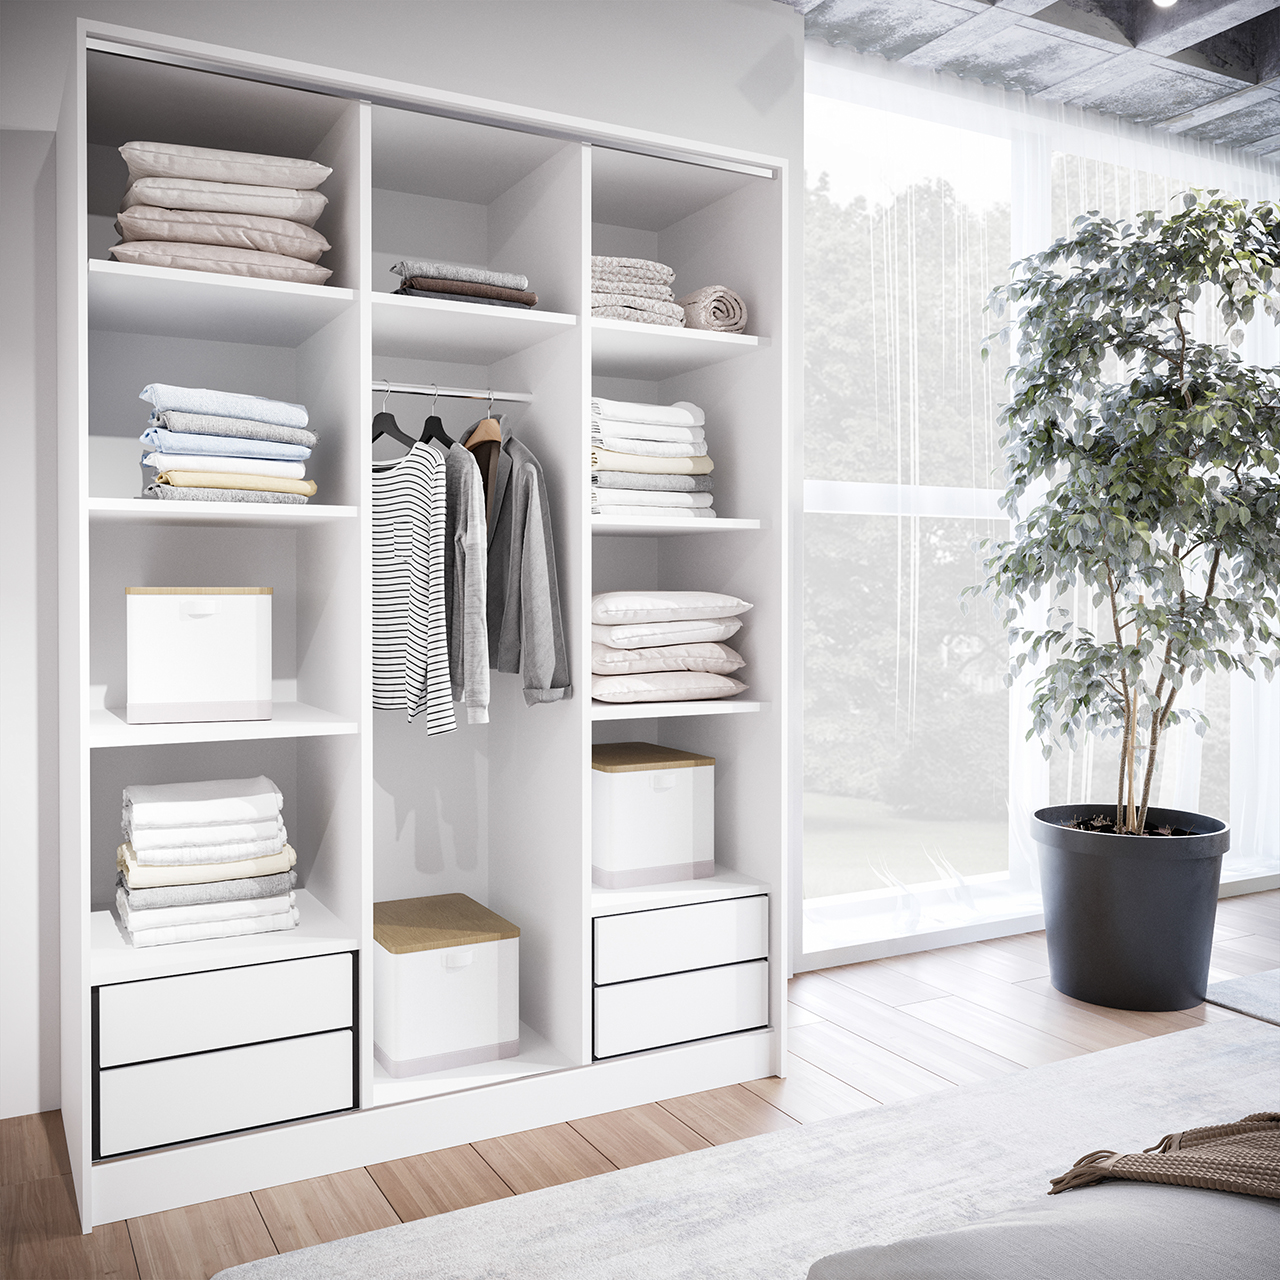 Sliding Wardrobe with Mirror and Drawers GRANO C 150 white